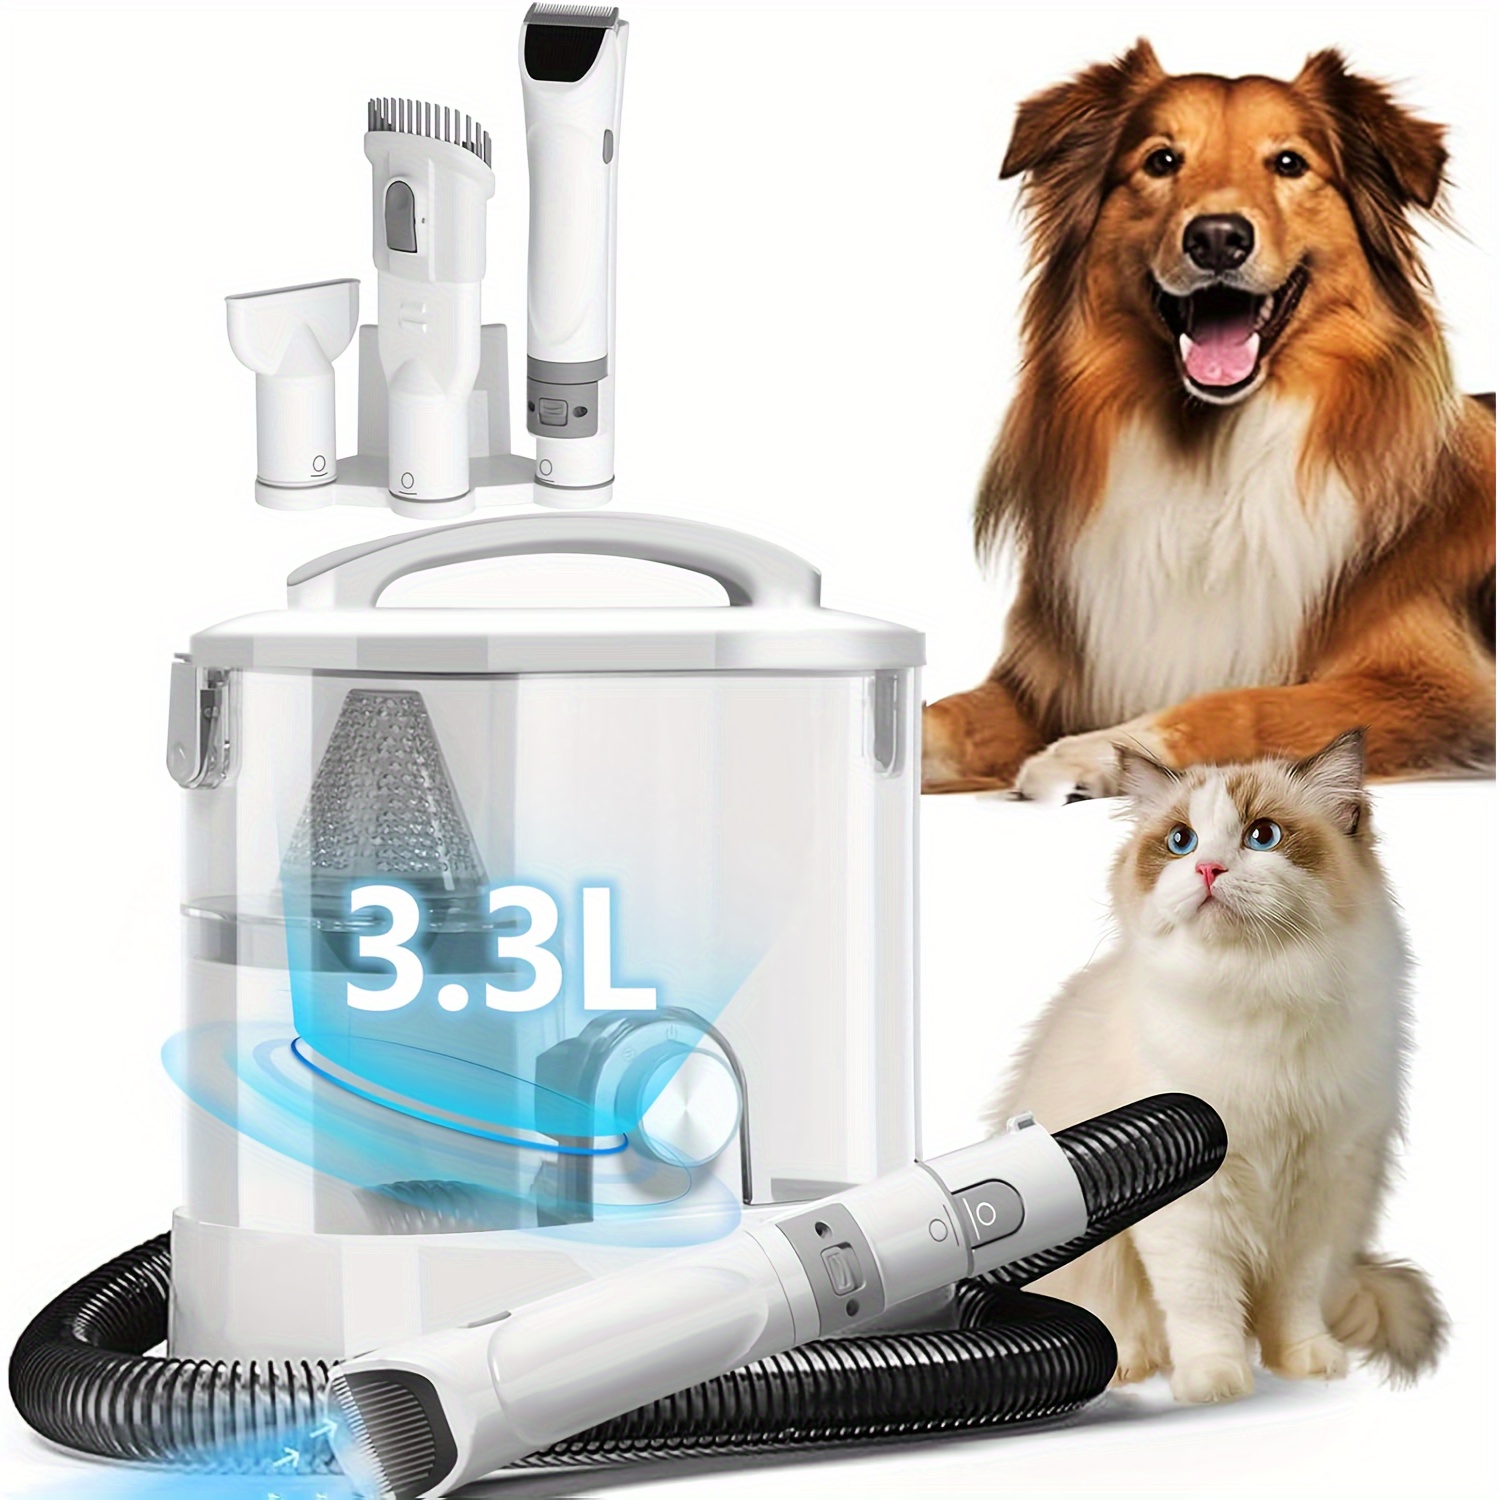 

1set, Pet Hair Vacuum For Shedding Grooming With Dog Clipper - Multipurpose Dog Grooming Kit With 3.3l Large Capacity Dust Box And Dryer Hair, 6 Pieces Grooming Tools For Dogs And Cats ( 4 In 1)